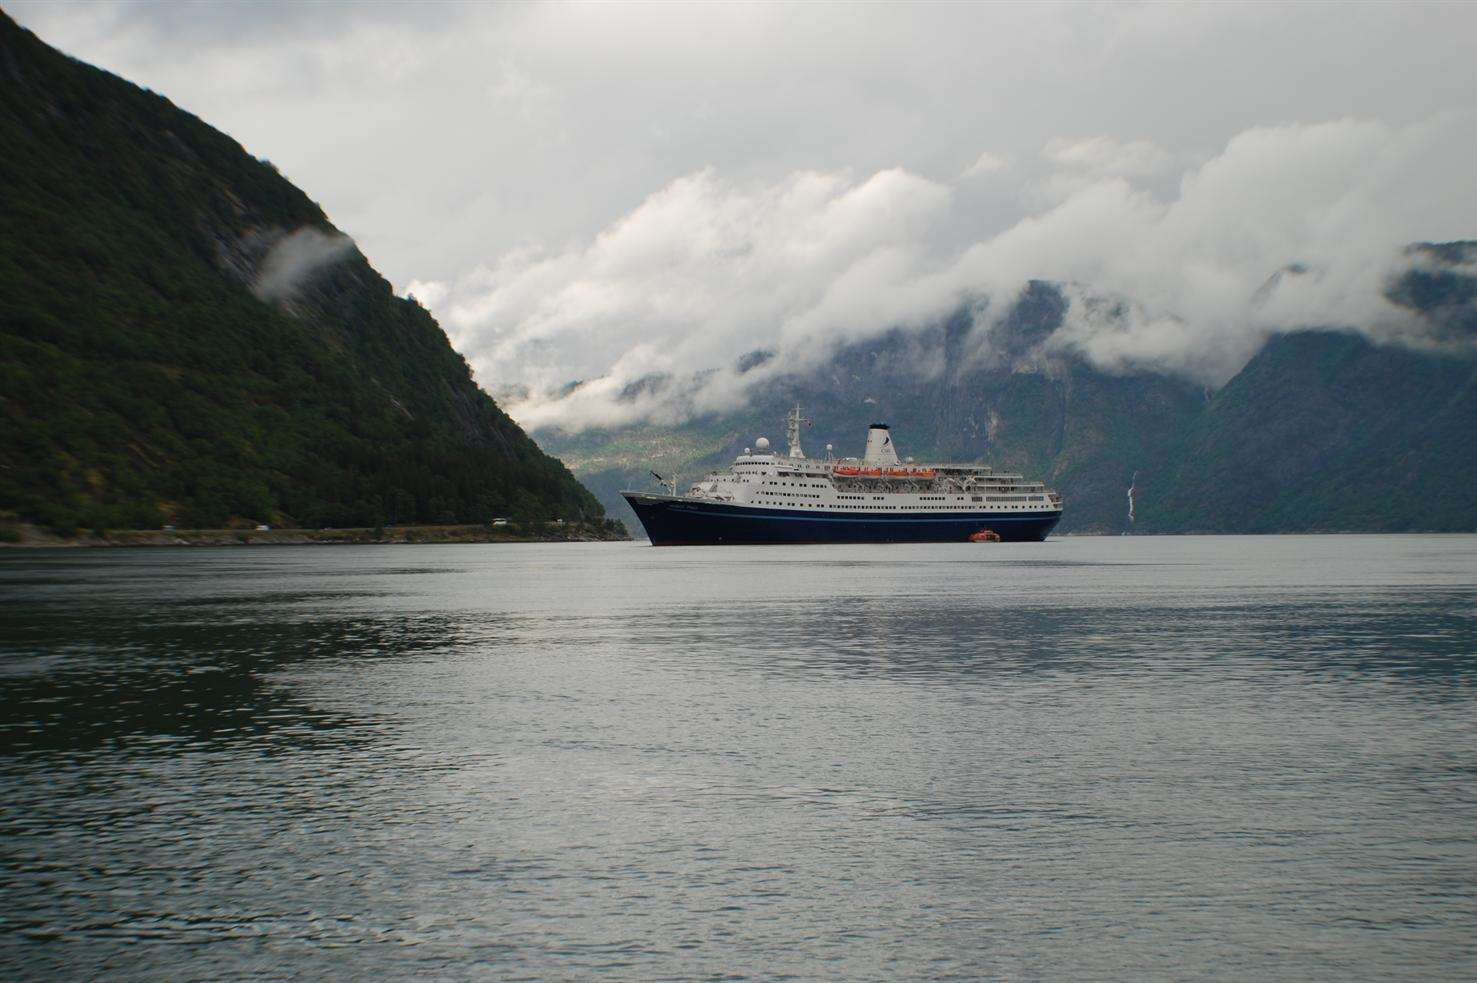 The Marco Polo docked in Eidfjord, Norway